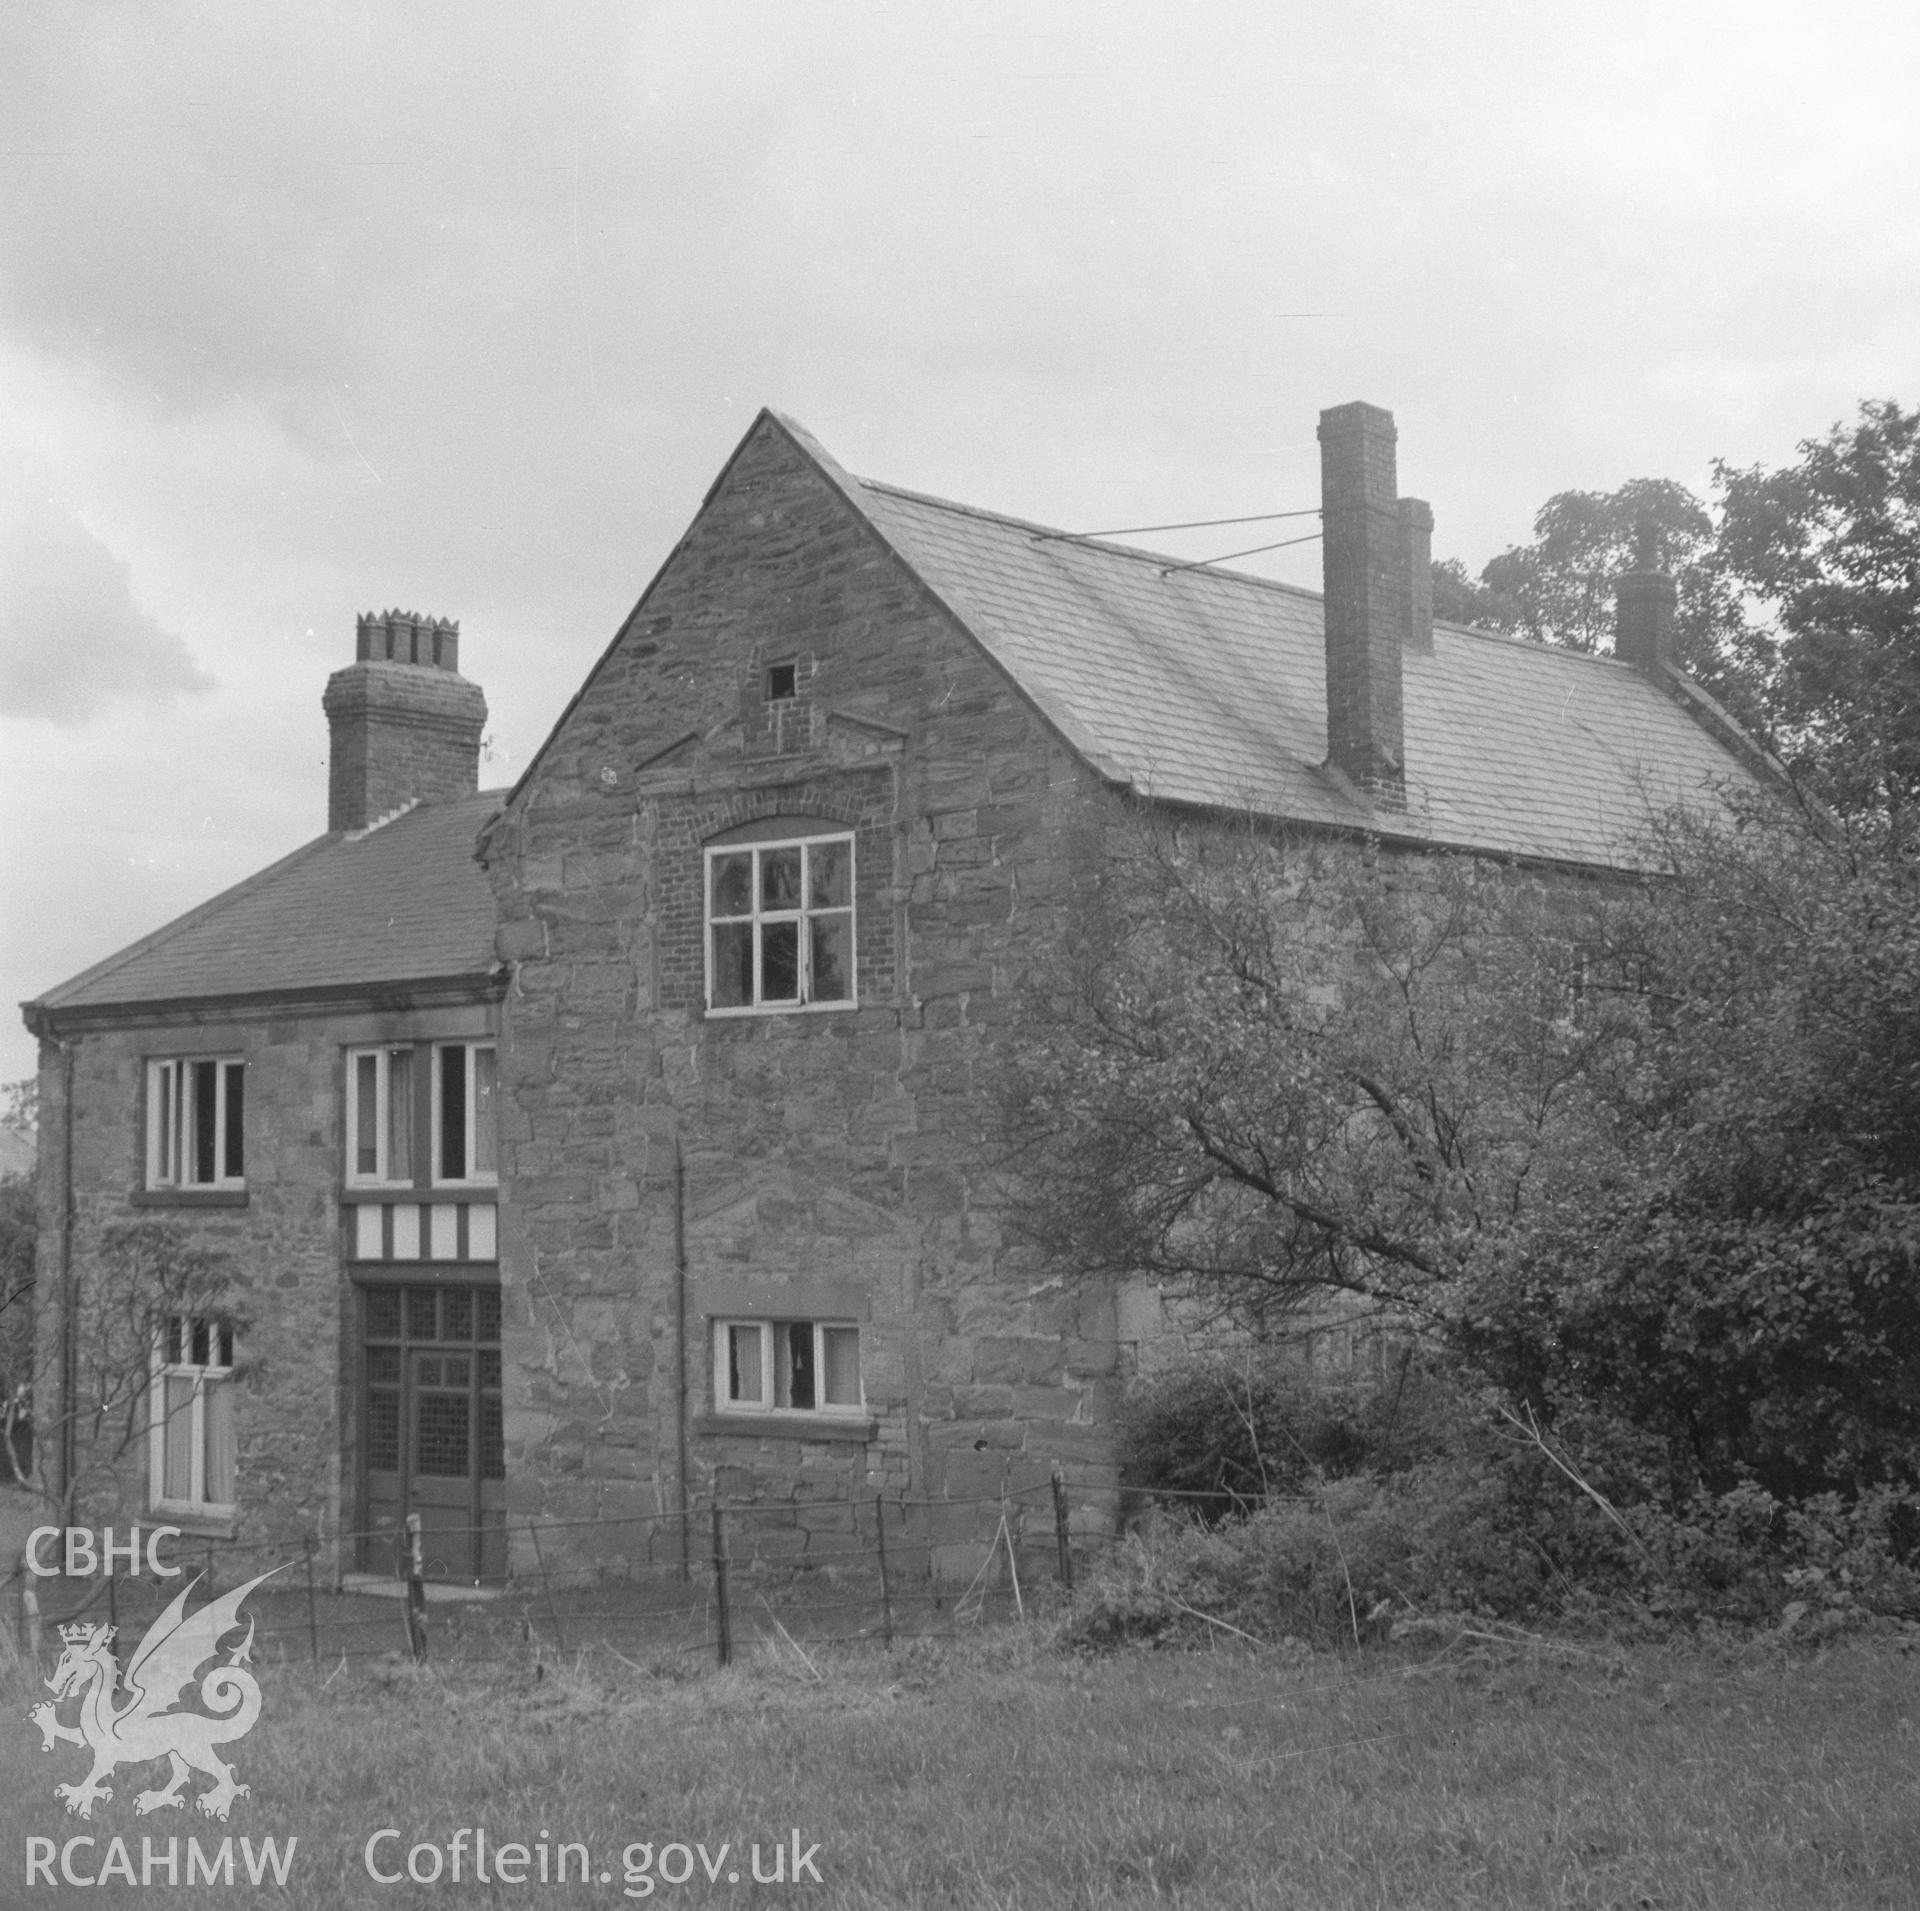 Digital copy of a black and white nitrate negative showing exterior view of Llyseurgain;Northop Hall Farmhouse.